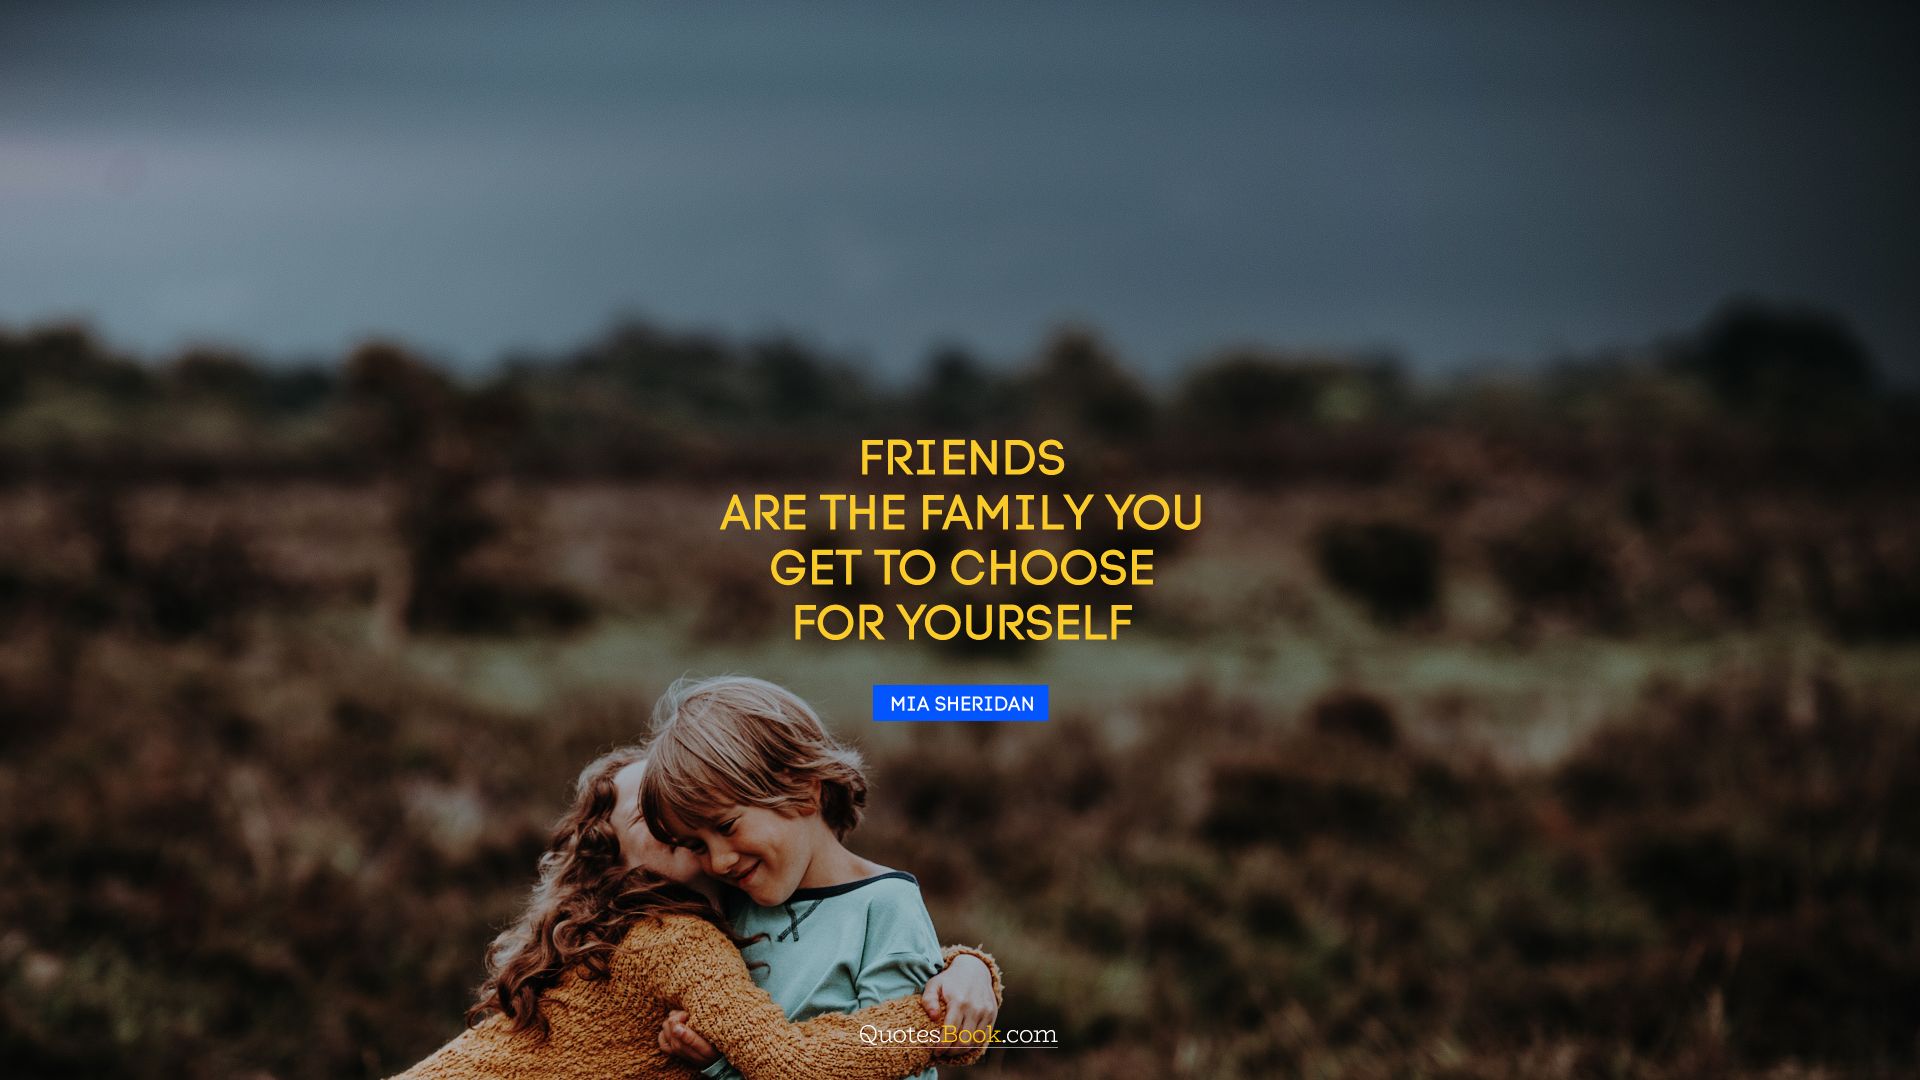 Friends are the family you get to choose for yourself. - Quote by Mia Sheridan